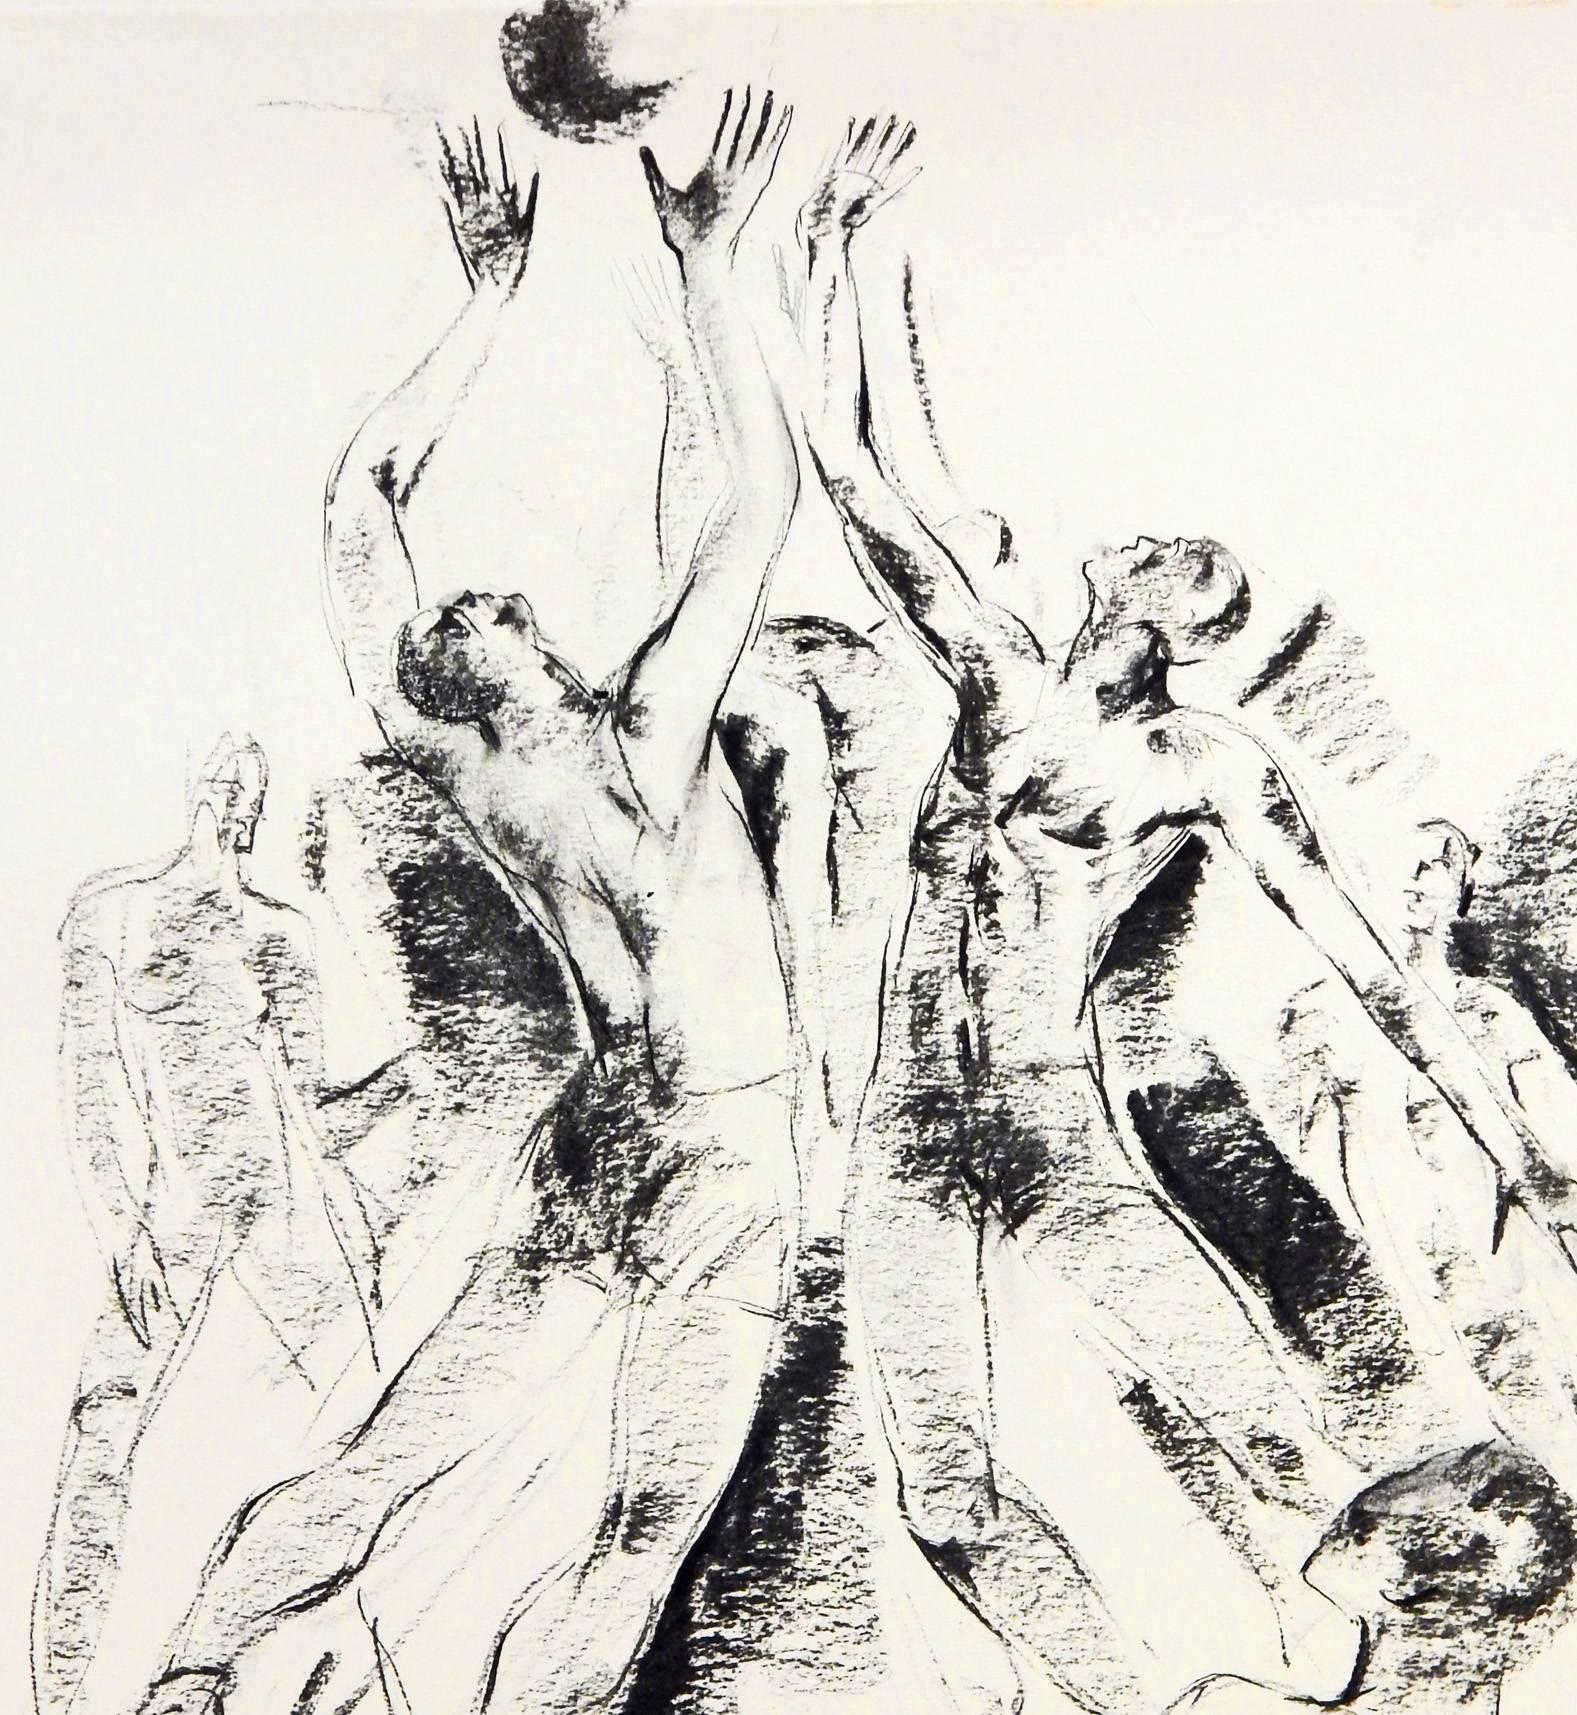 Because basketball was not widely known or appreciated outside North America until later in the 20th century, this bold and high-energy drawing by a Belgian artist is a rare glimpse into the sport in the 1930s. Paul Daxhelet depicted many figures